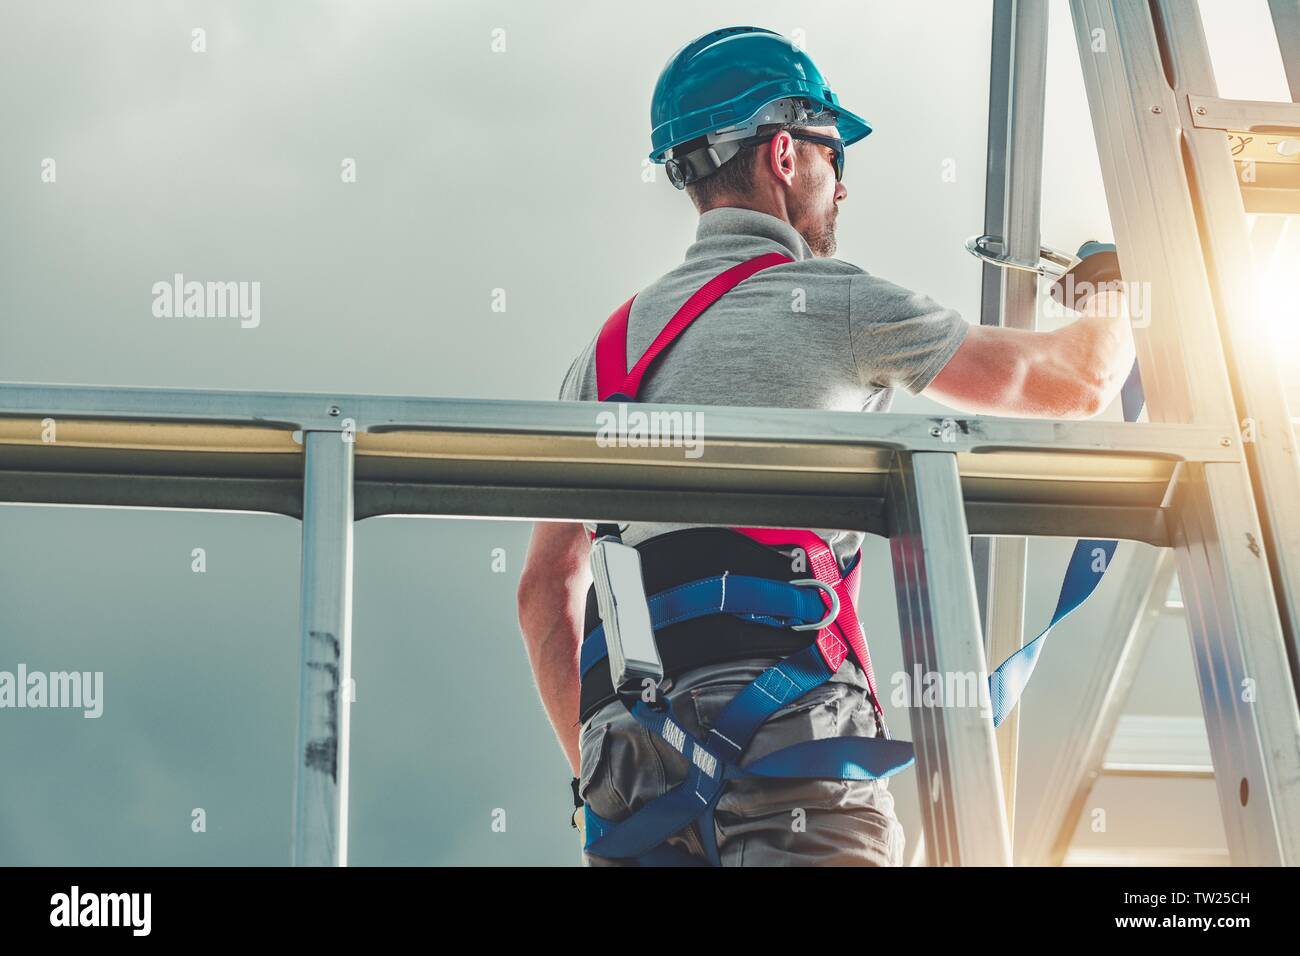 Caucasian Construction Contractor in His 30s Wearing Safety Harness. Steel House Building. Industrial Theme. Stock Photo